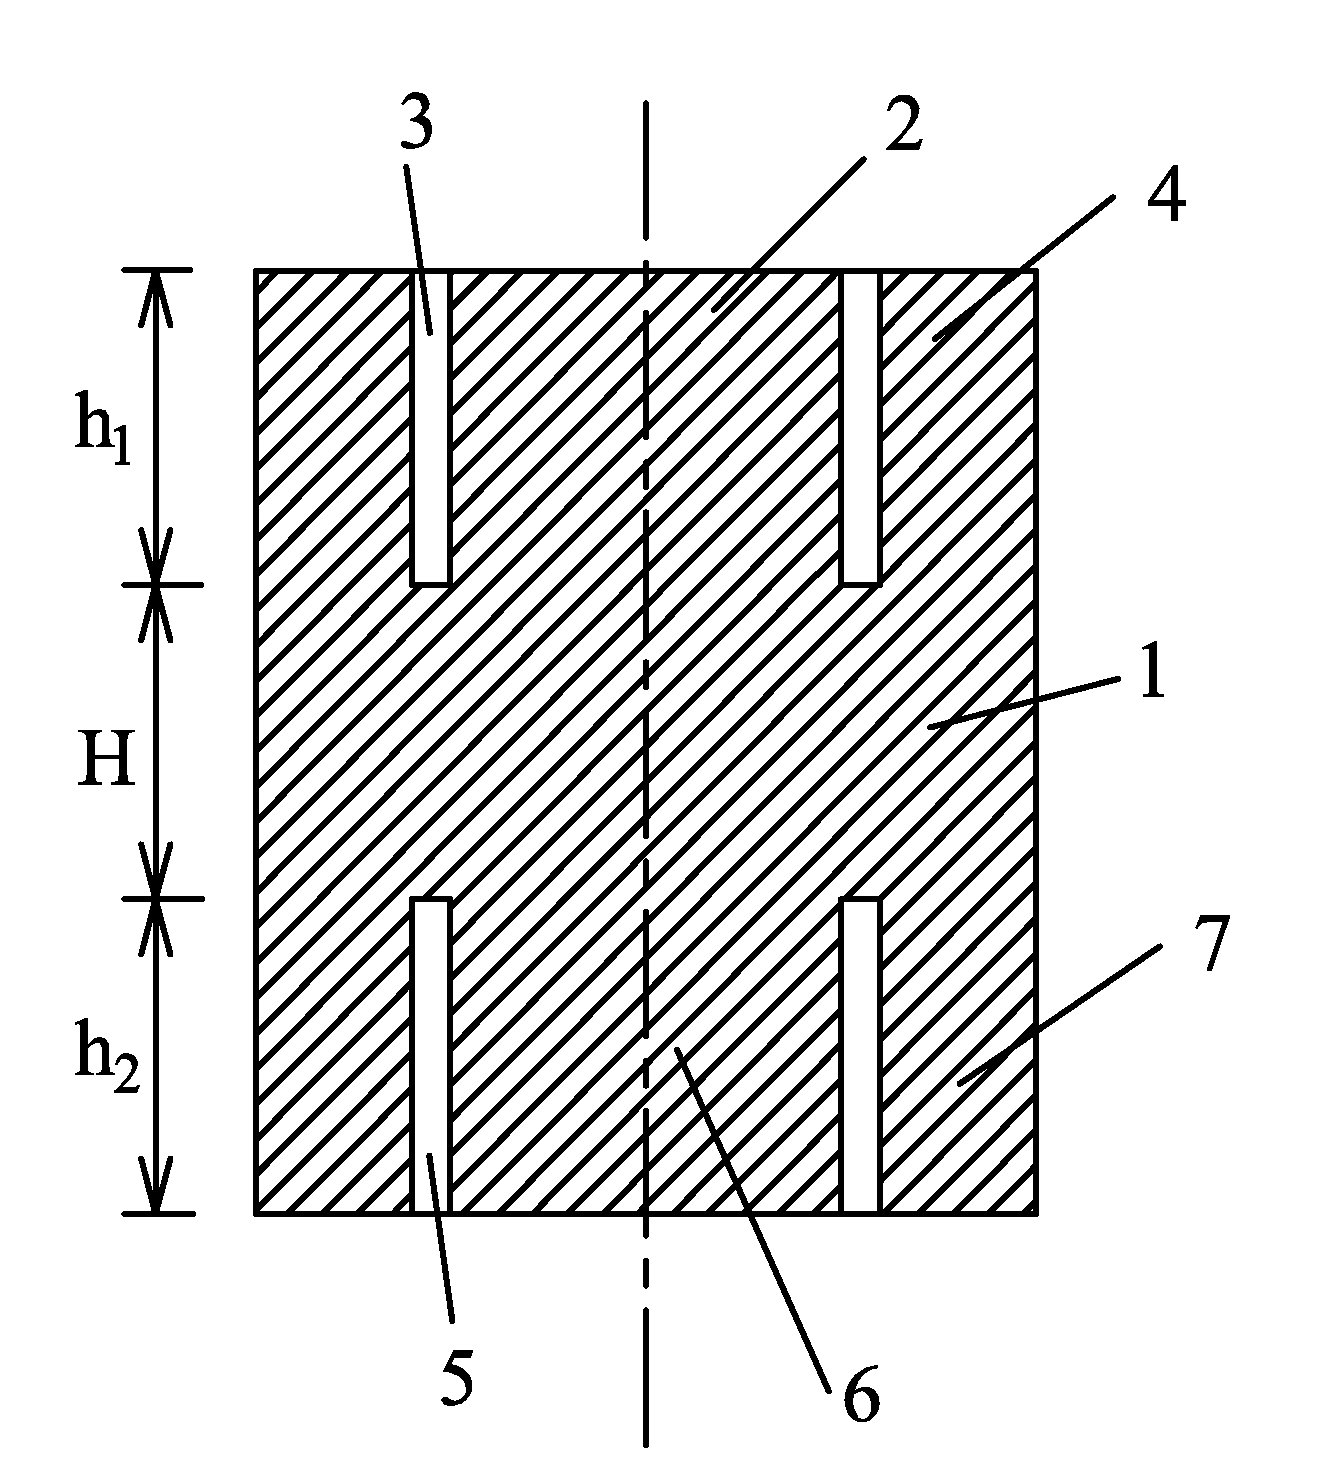 Rock specimen and method for testing pure shear of the same